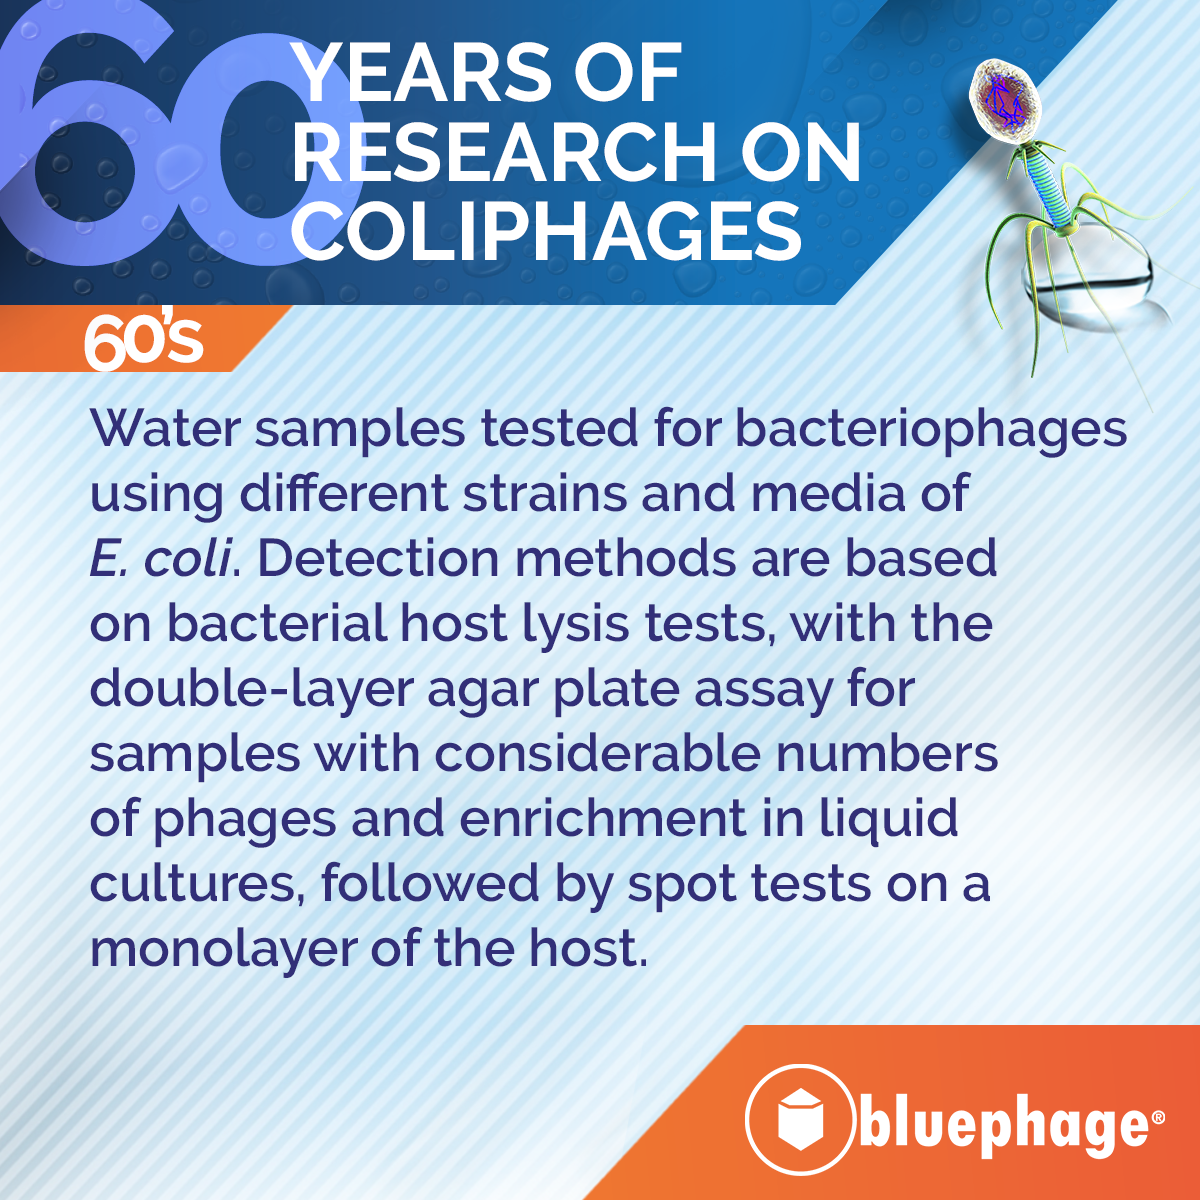 60 years coliphages research 1